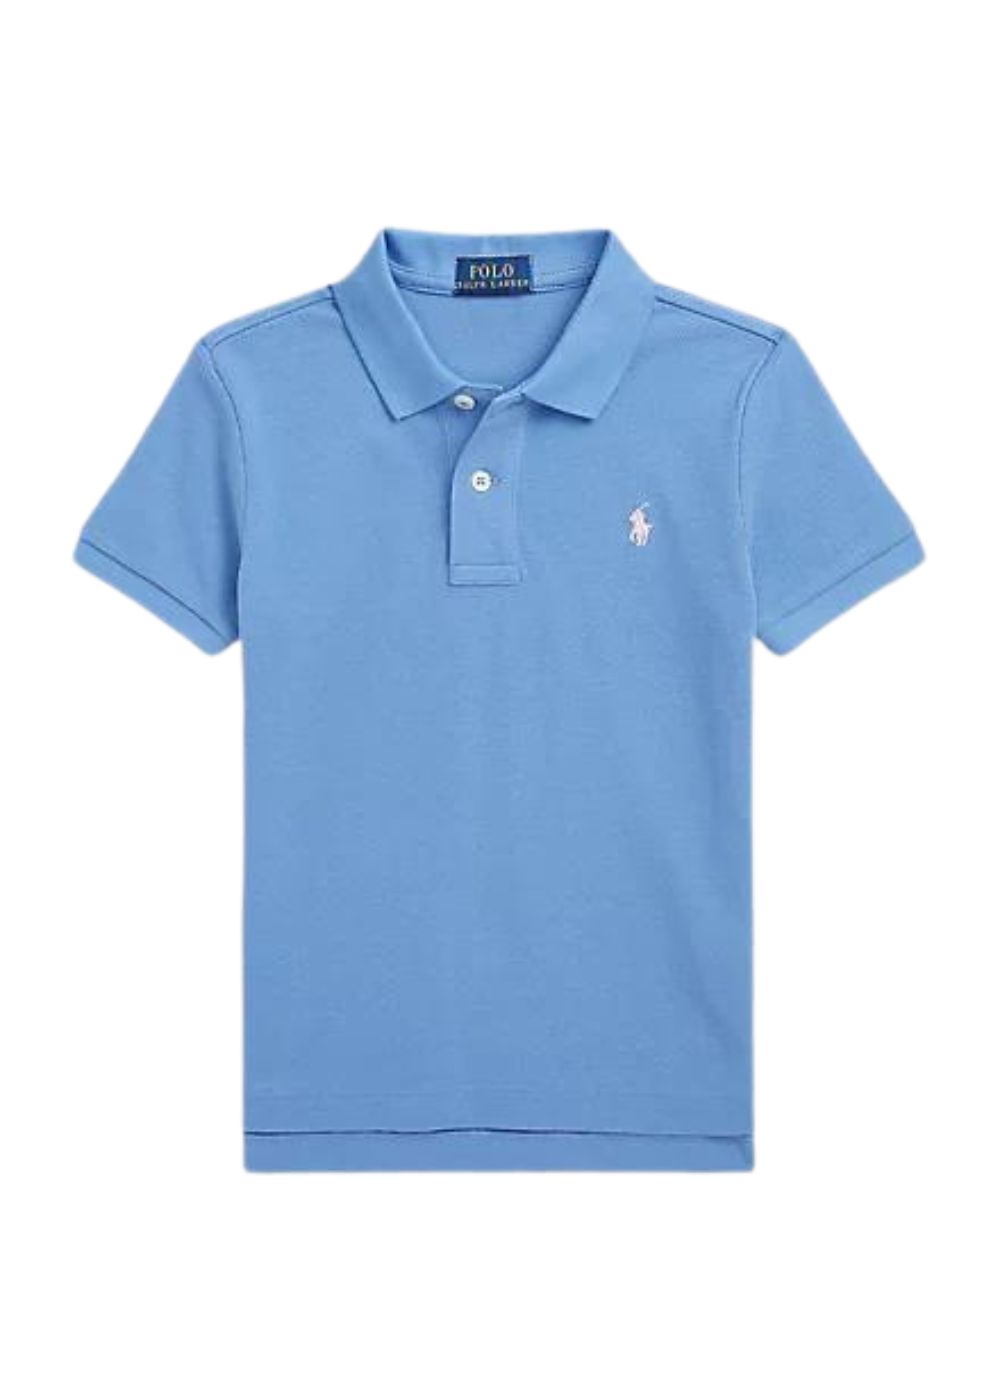 Featured image for “Polo Ralph Lauren Polo In Piquè”